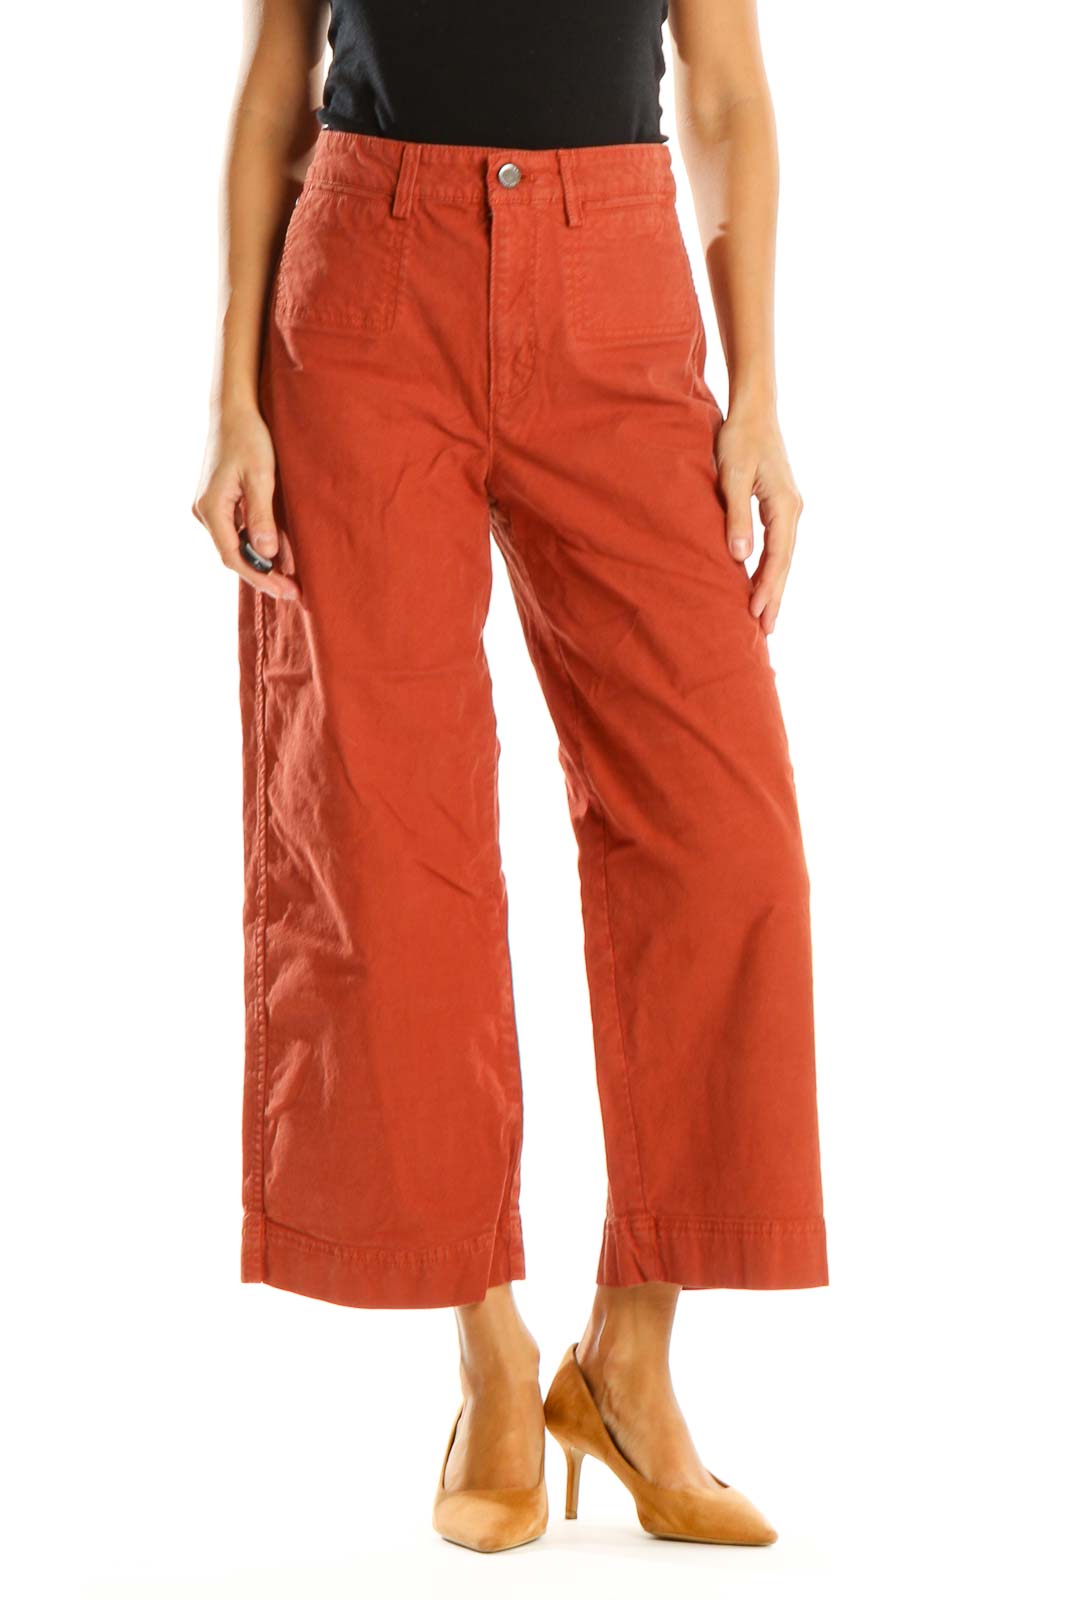 Red Solid All Day Wear Palazzo Pants Front